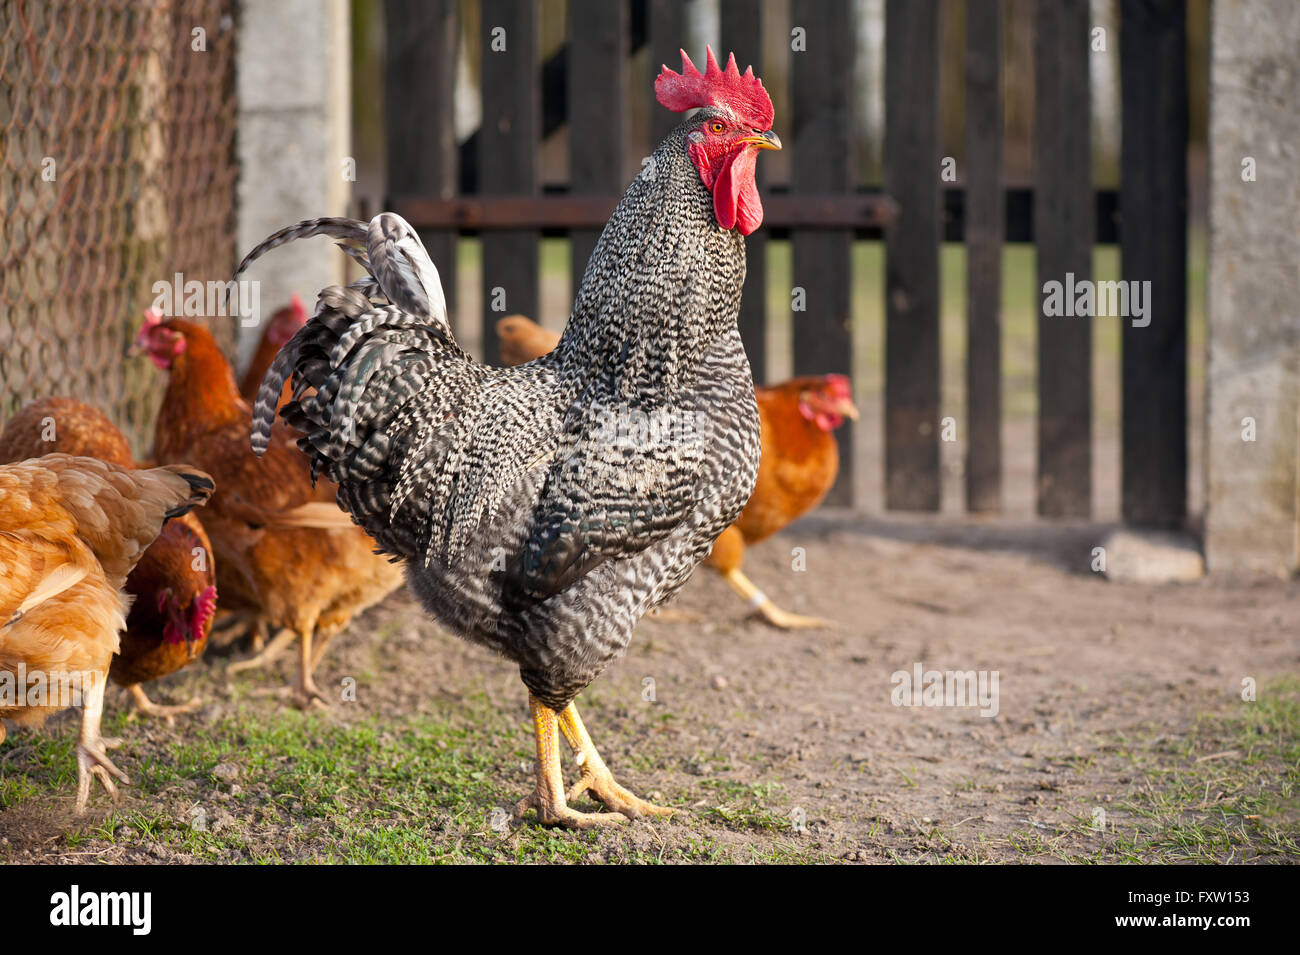 Dominant plymouth rock chicken rooster with black and white barred plumage and brown Rhode Island Red hens, birds flock in yard. Stock Photo